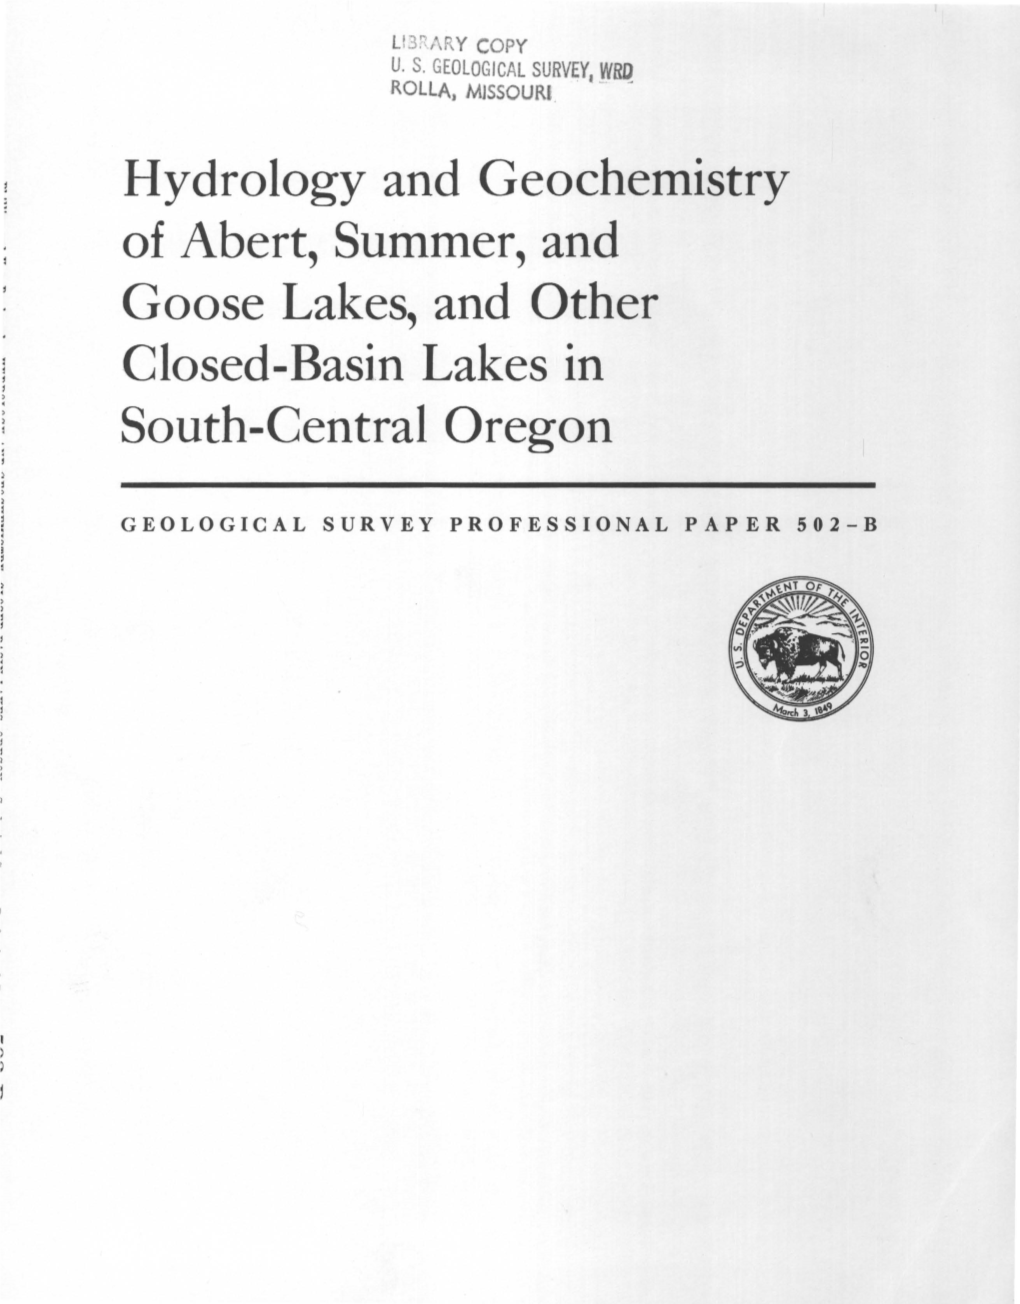 Hydrology and Geochemistry of Abert, Summer, and Goose Lakes, and Other Closed-Basin Lakes in South-Central Oregon